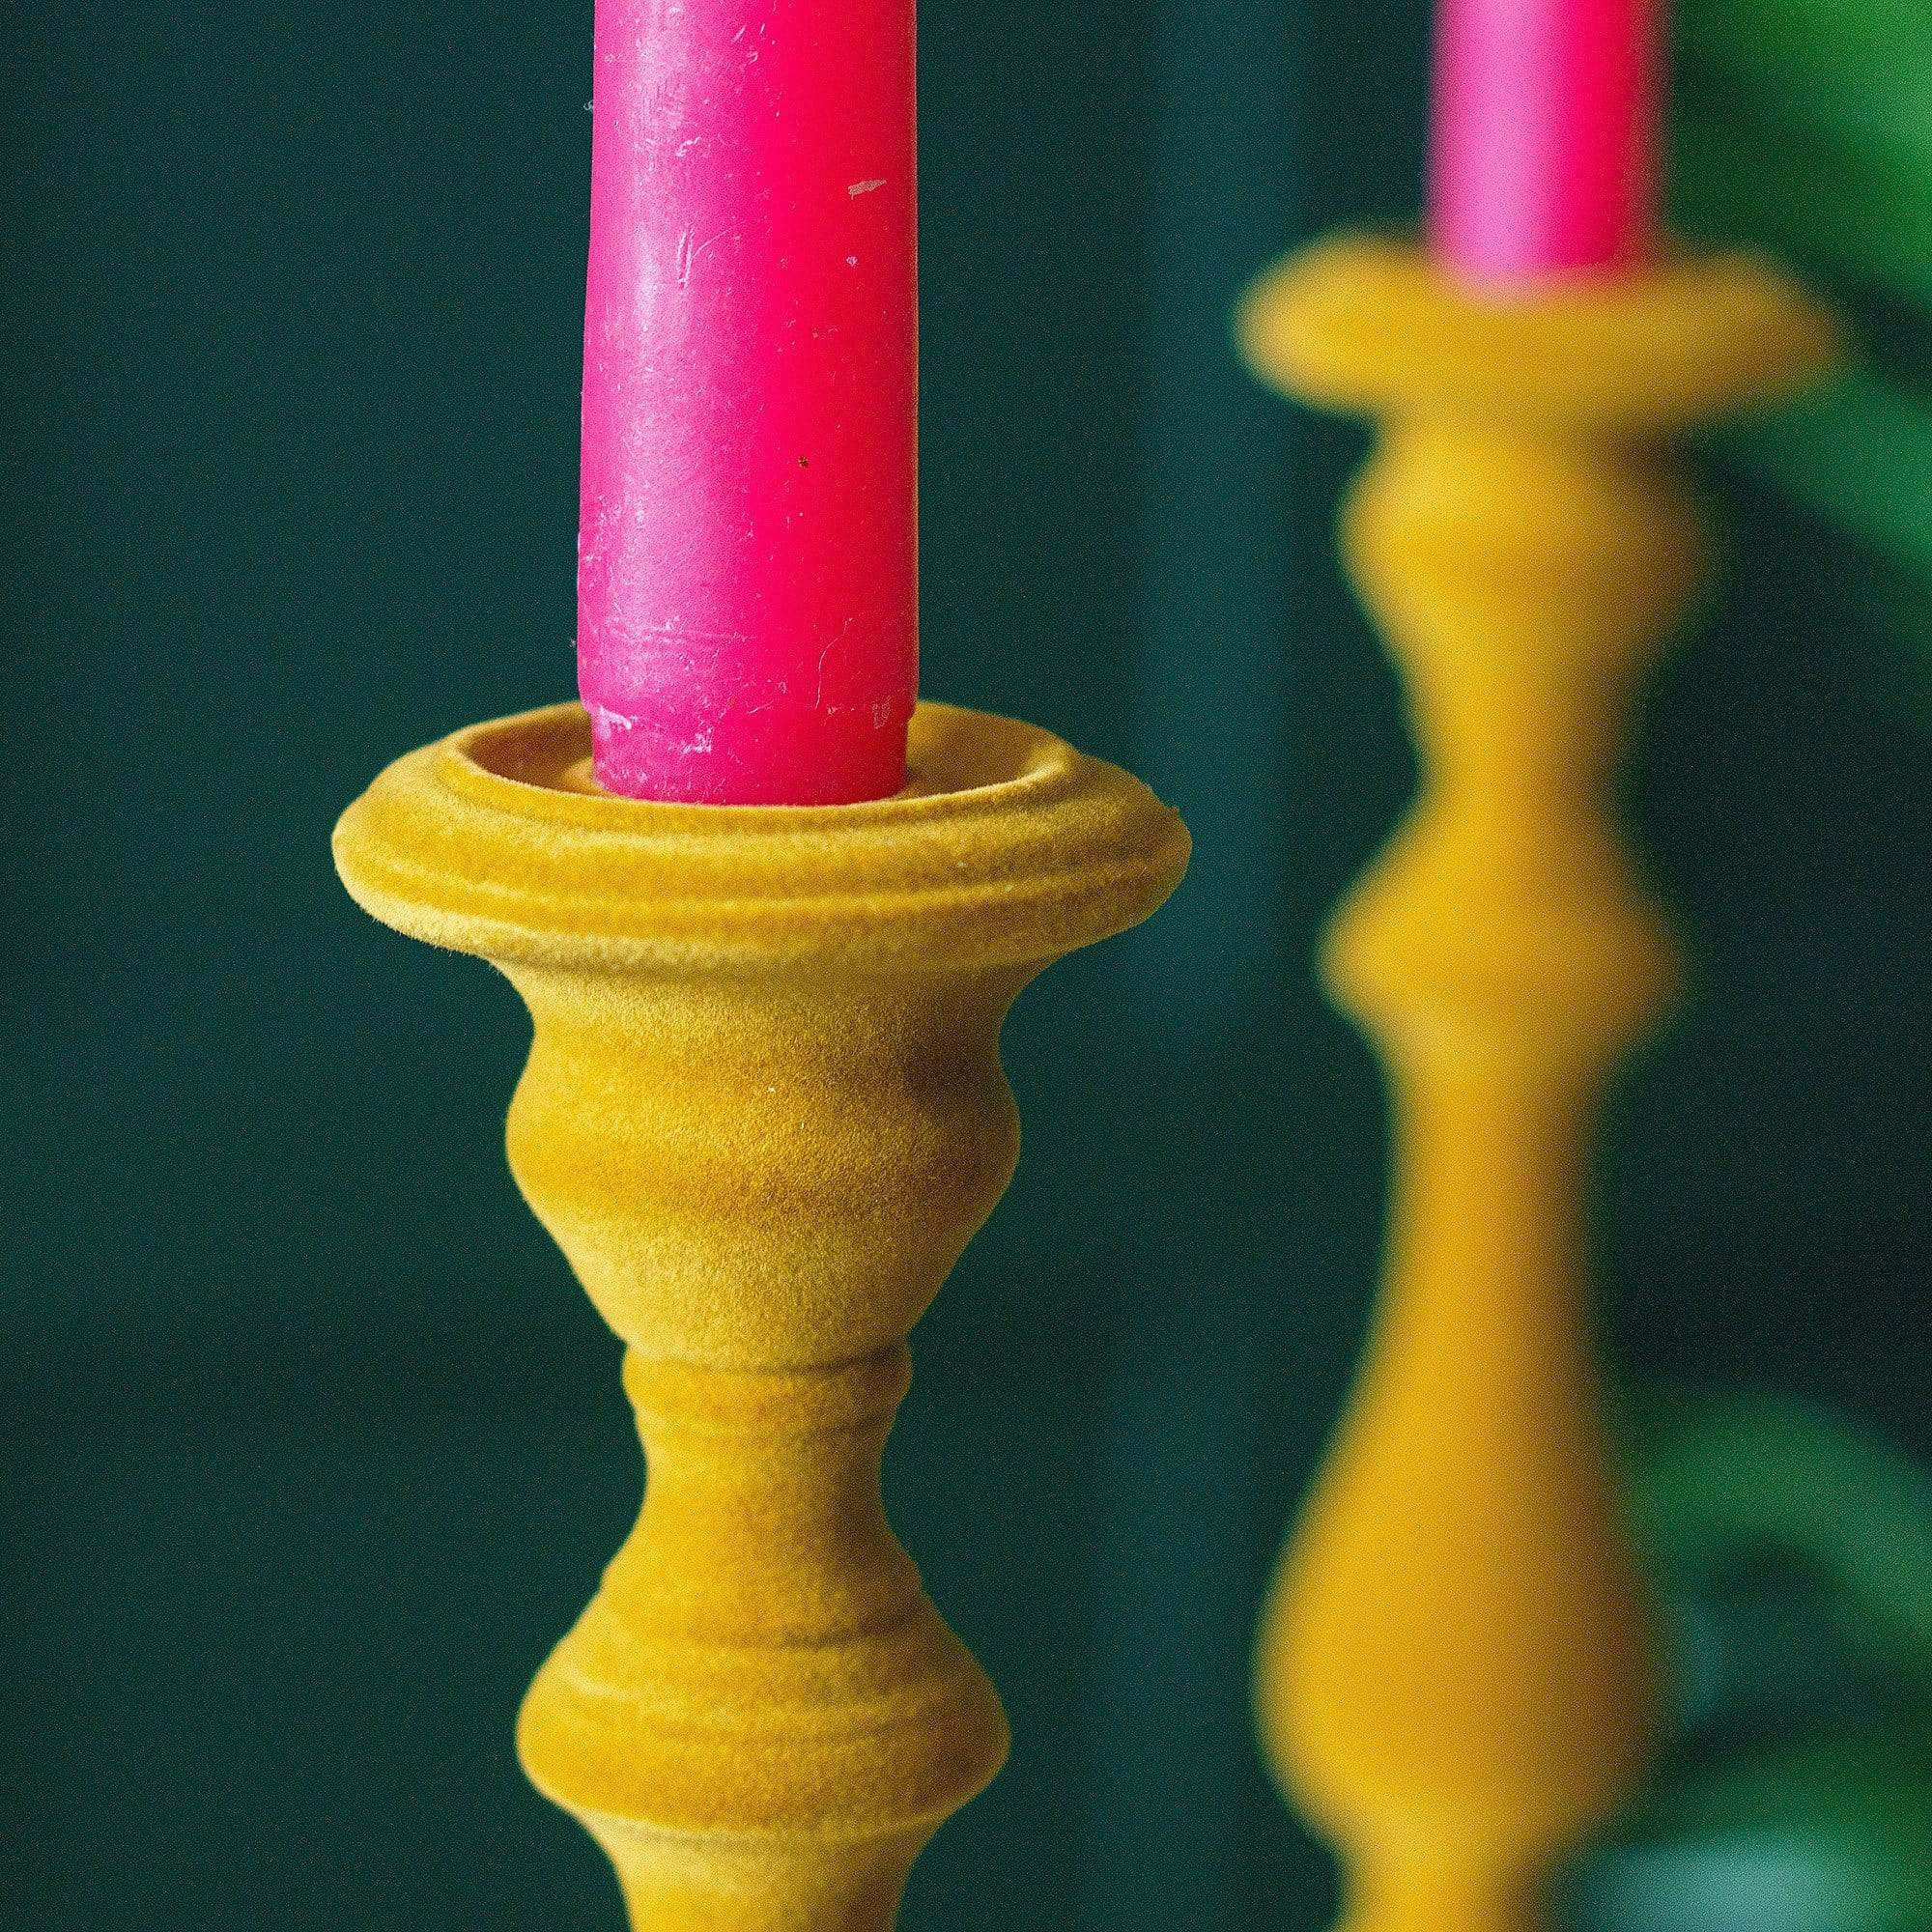 Colour Pop Yellow Flocked Candle Stick